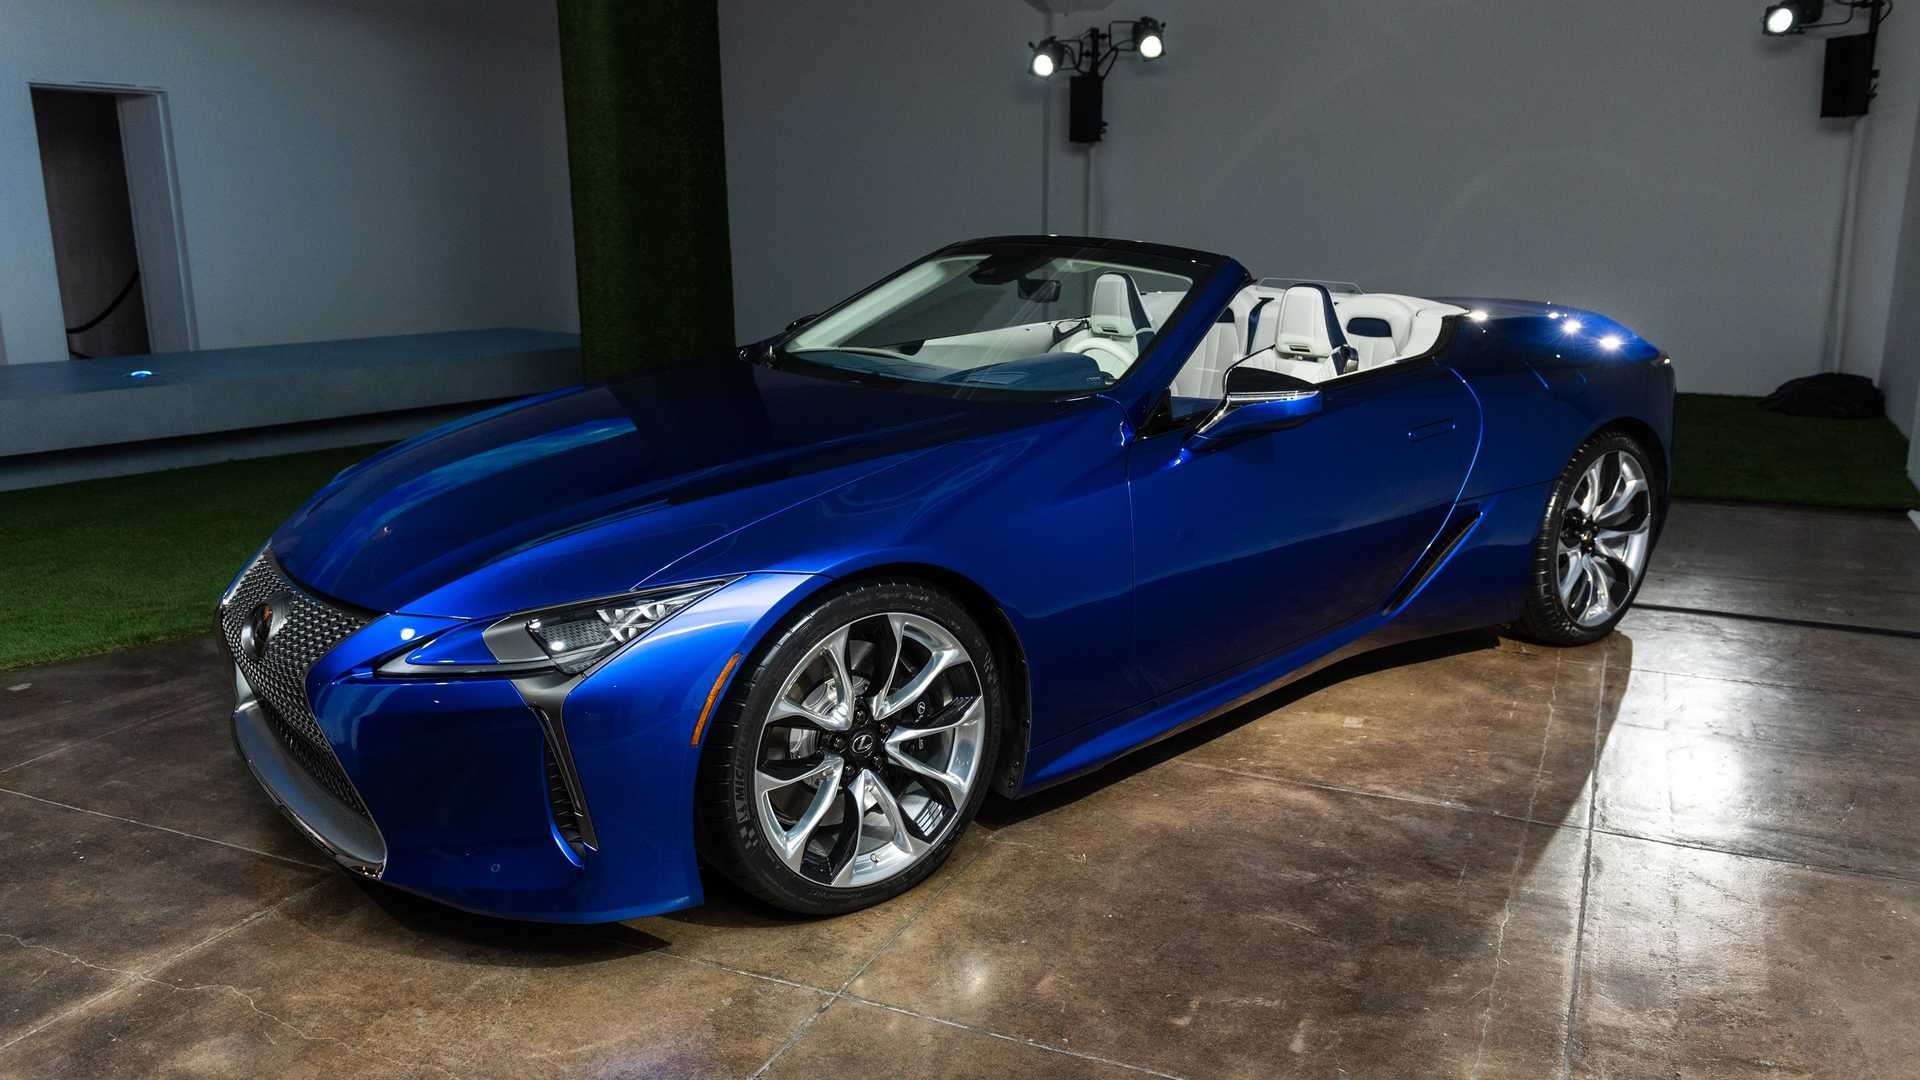 Lexus LC 500 Convertible Debuts Its Roofless Shape In Sunny LA